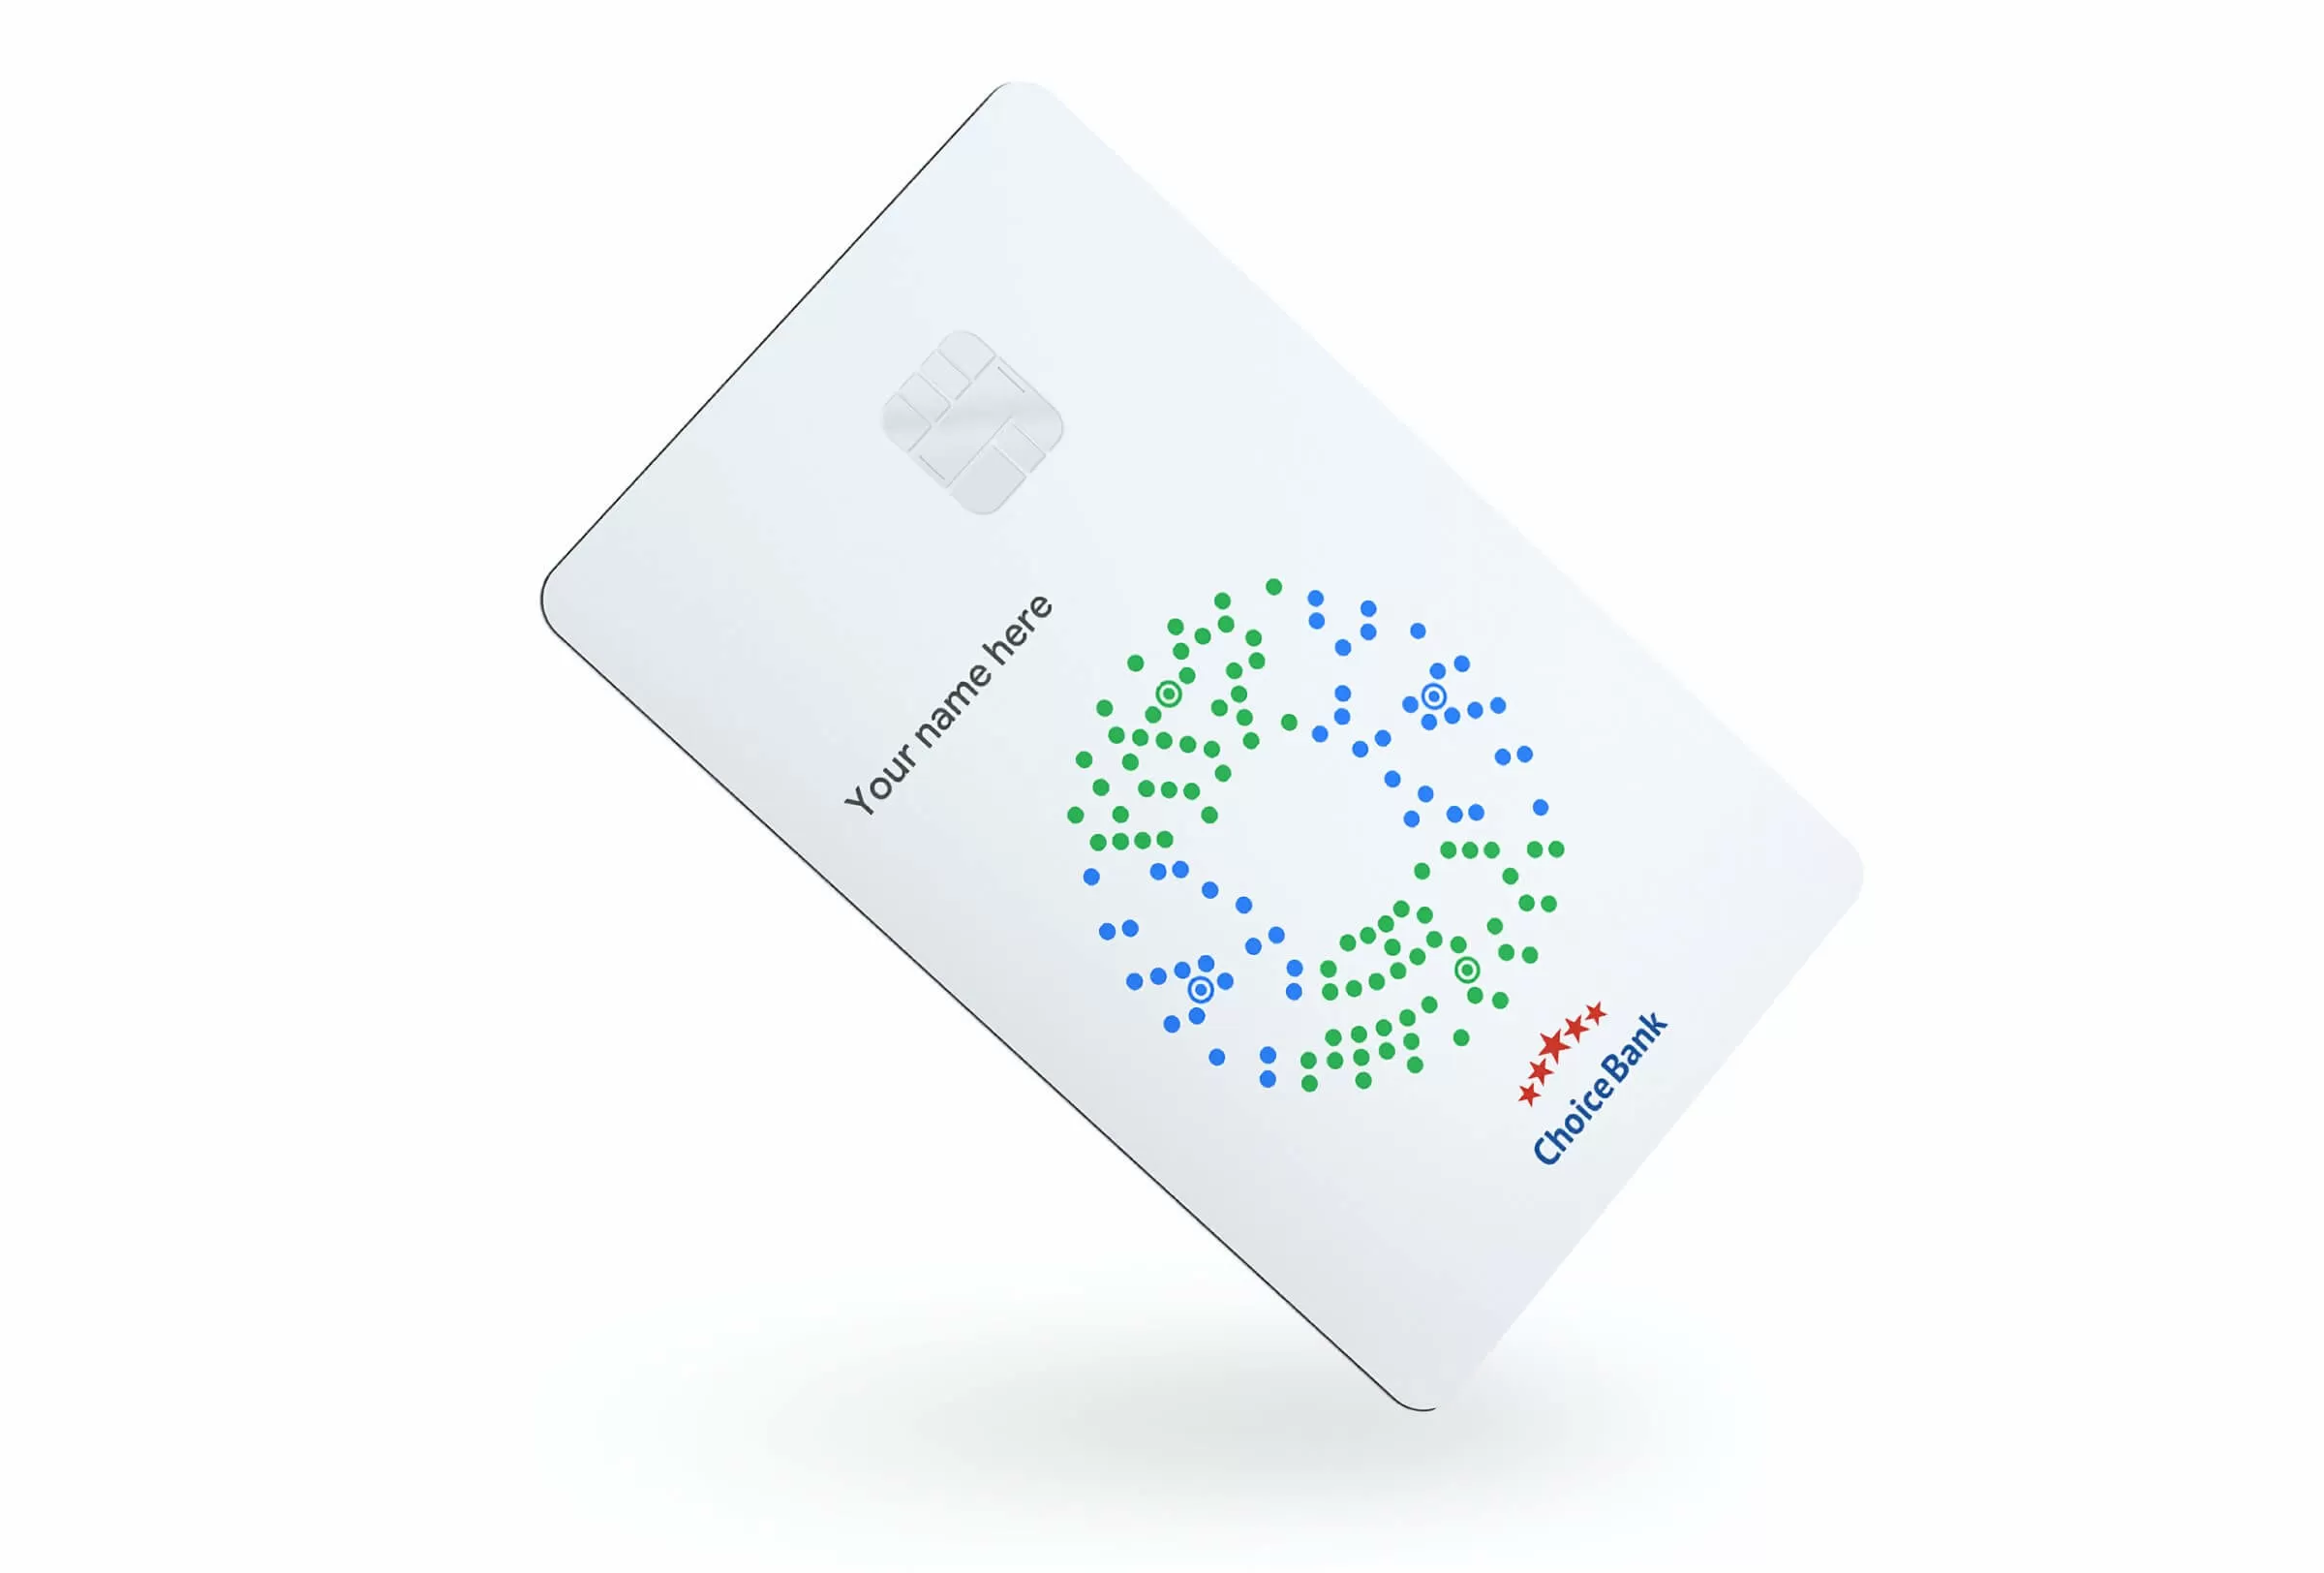 Google has reportedly added a smart debit card to its fintech plans